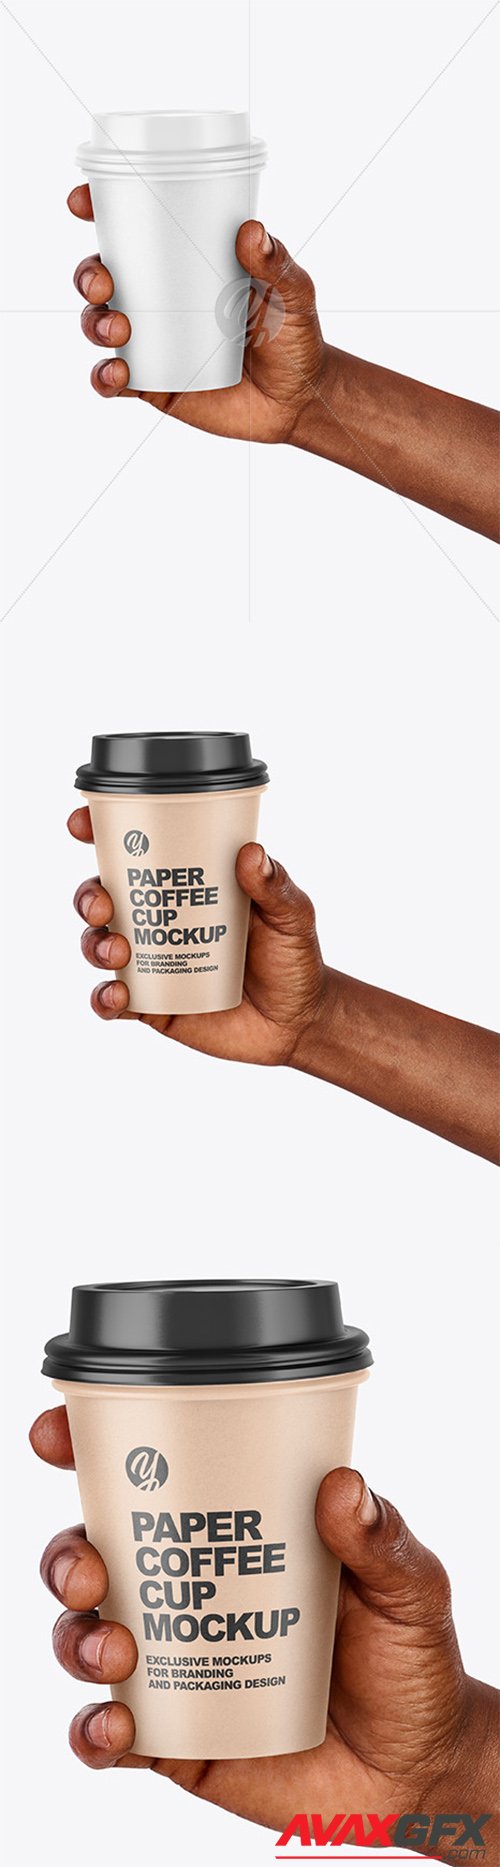 Hand Holding a Coffee Cup Mockup 63309